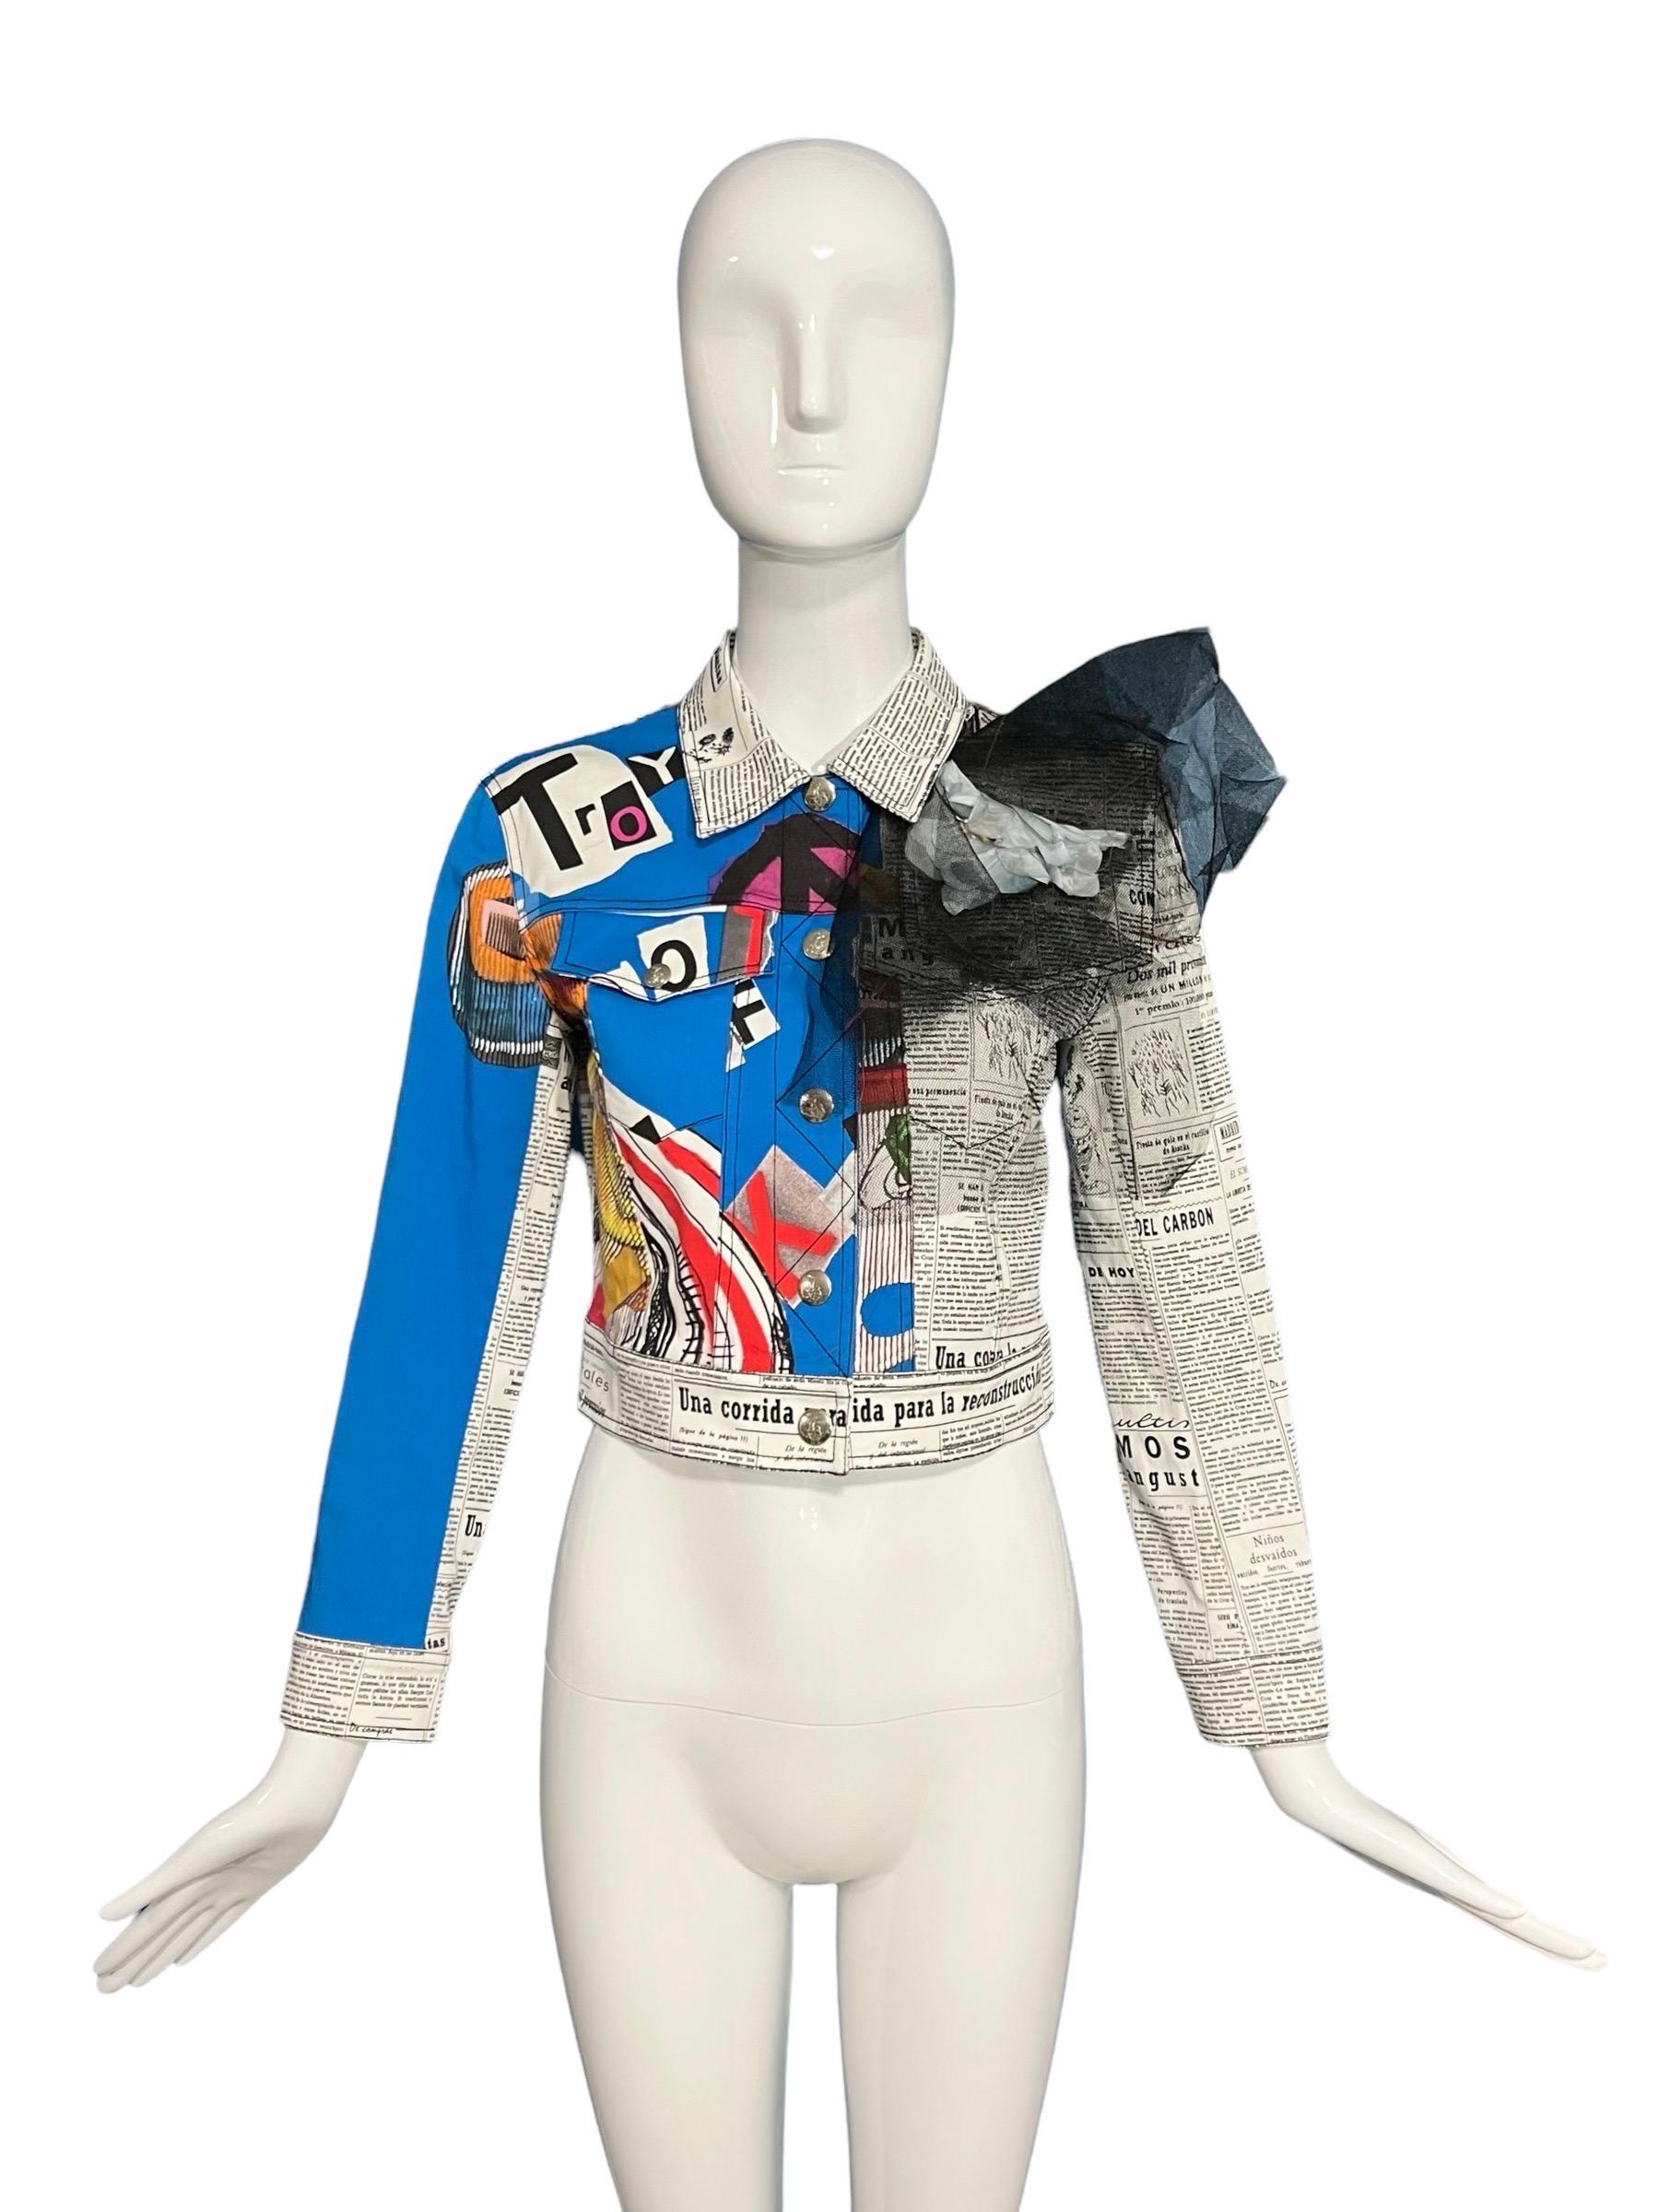 Rare newspaper and graffiti printed jacket from the collectible Spring 2001 collection and as seen on the runway.
Two front patch pockets.
Features abstract drawings and newspaper prints throughout.
Decorative abstract flower with tulle on the front